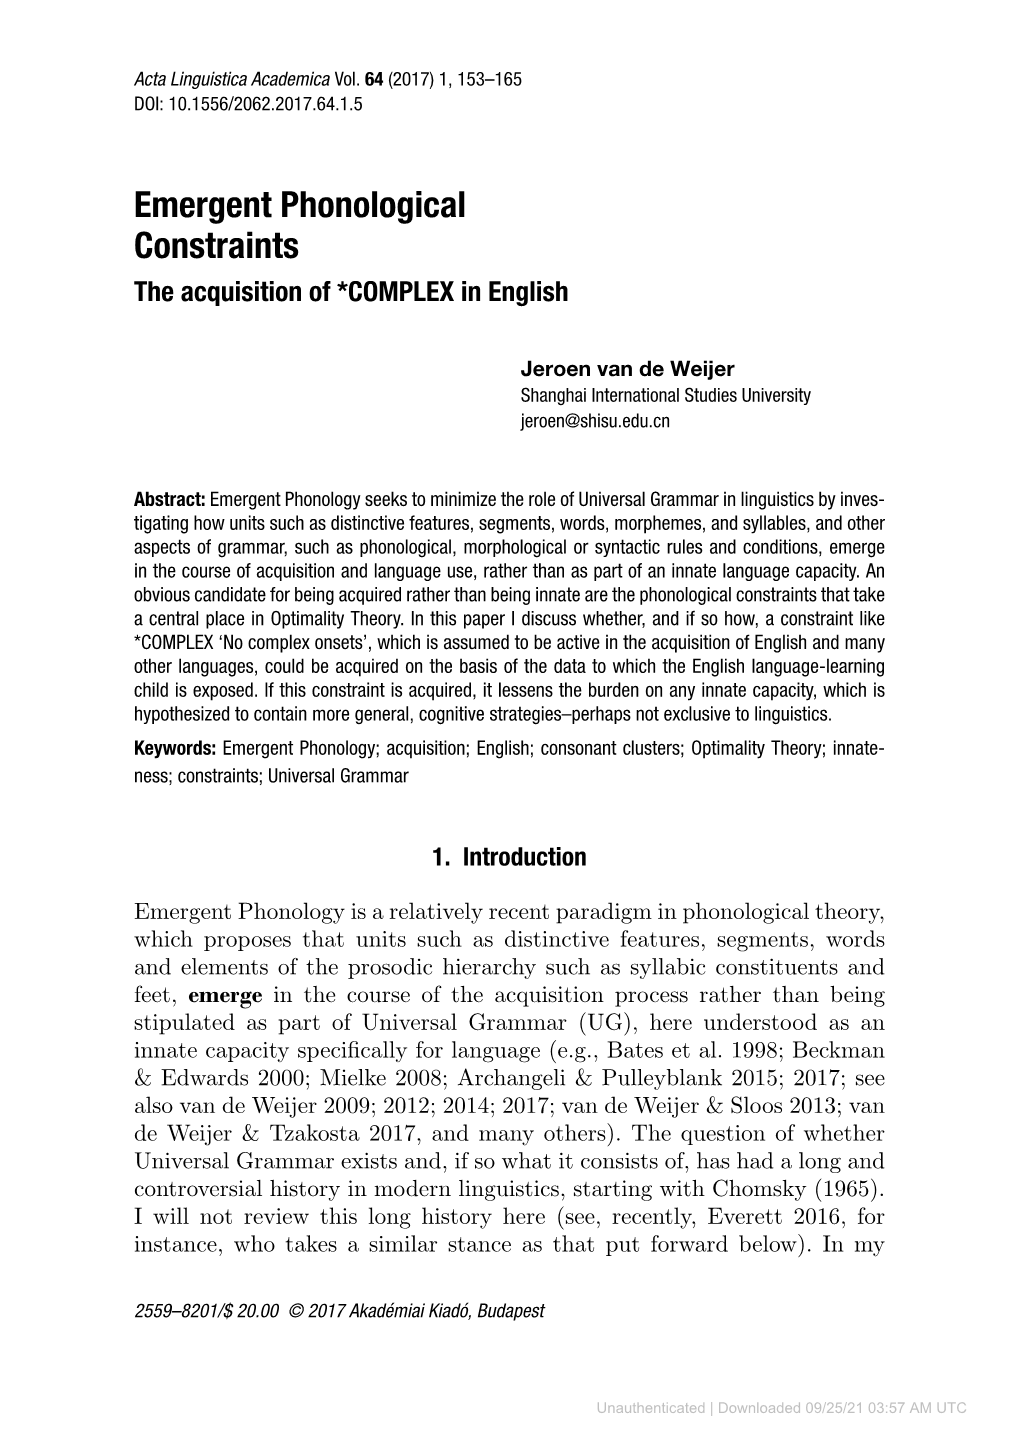 Emergent Phonological Constraints the Acquisition of *COMPLEX in English